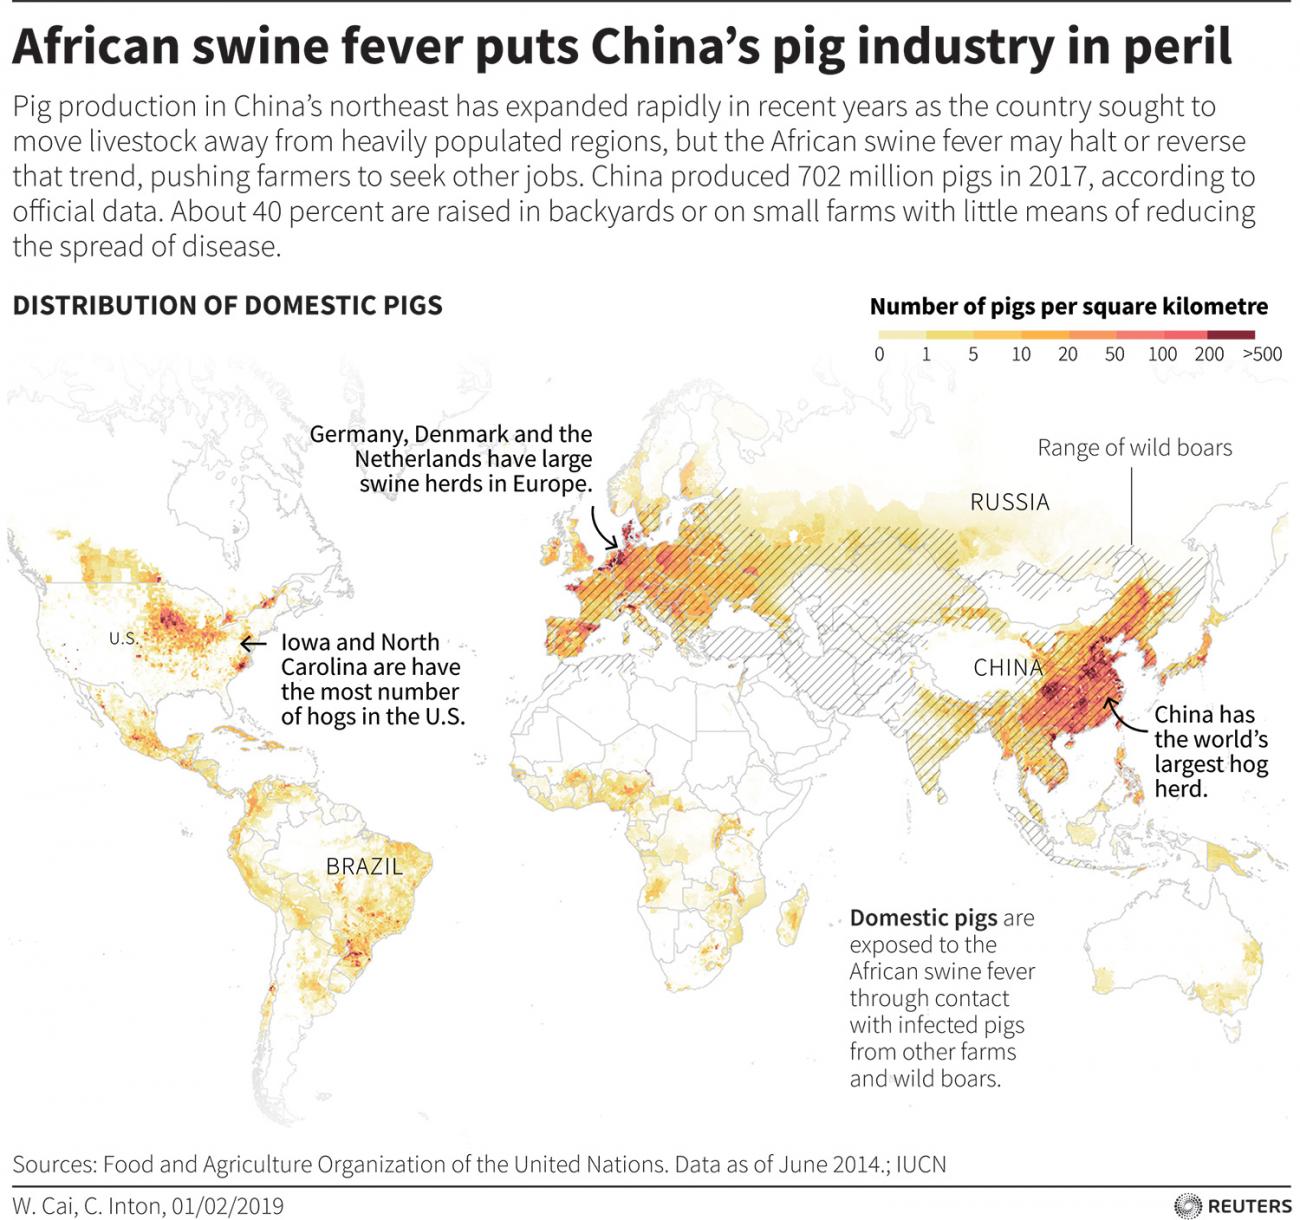 African swine fever puts China's pig industry in peril. Map showing distribution of domestic pigs around the world. REUTERS